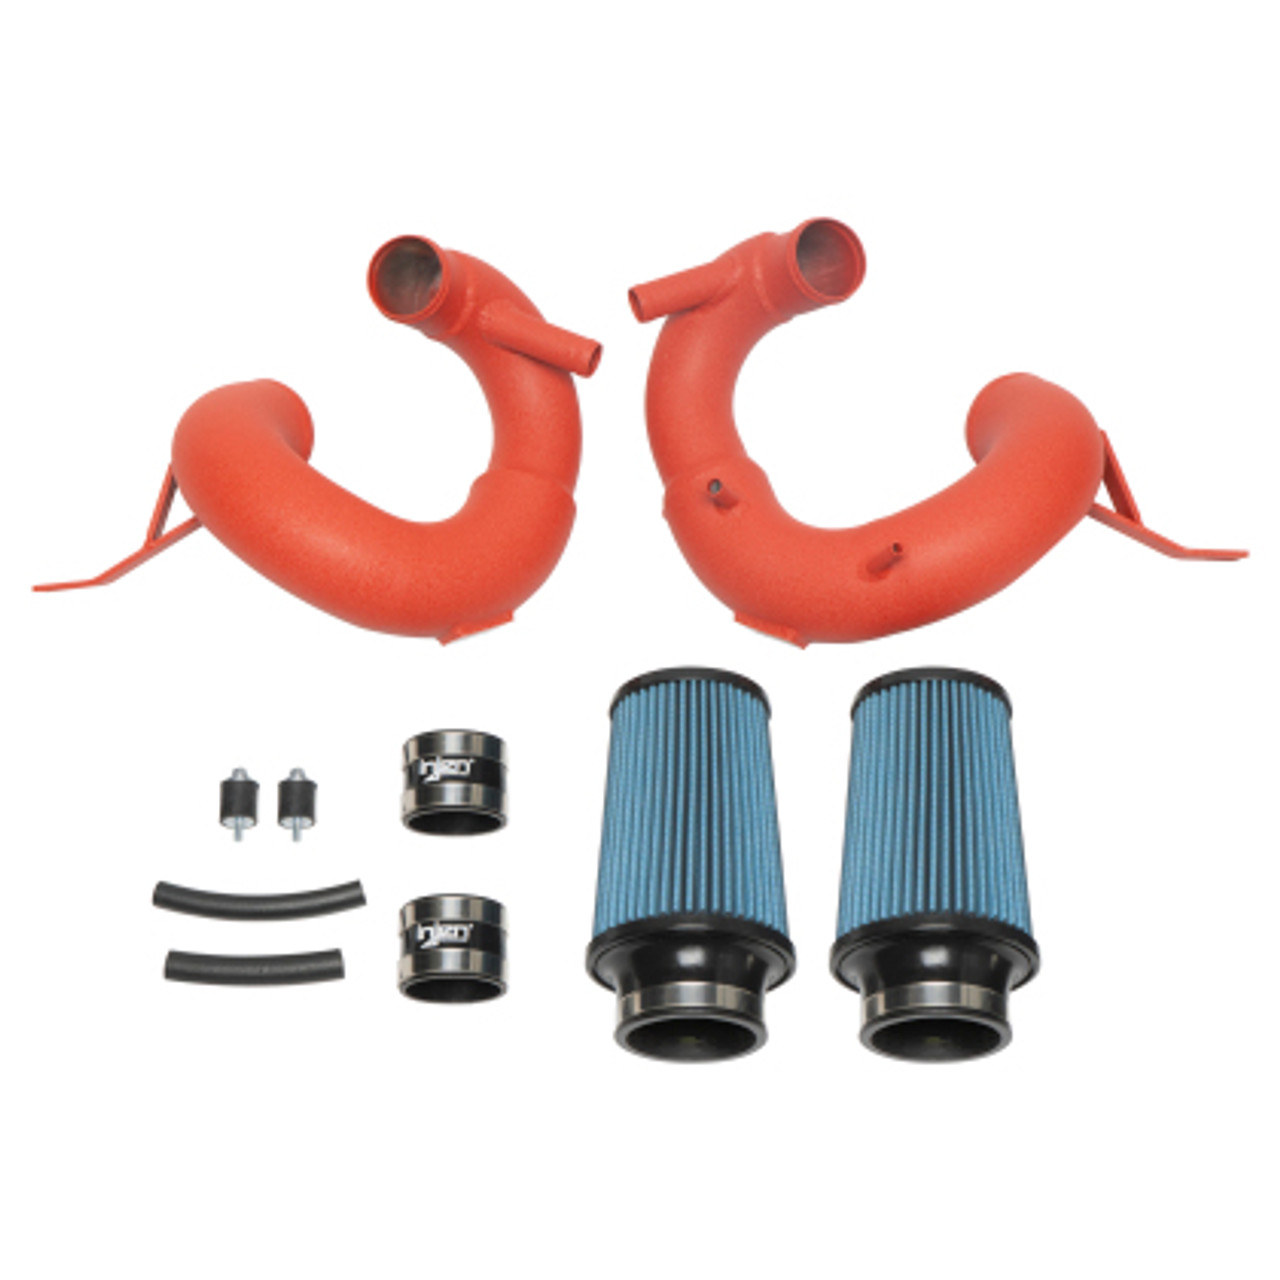 Tuned dual air intake pipes with Web nano-fiber dry filte - Wrinkle Red